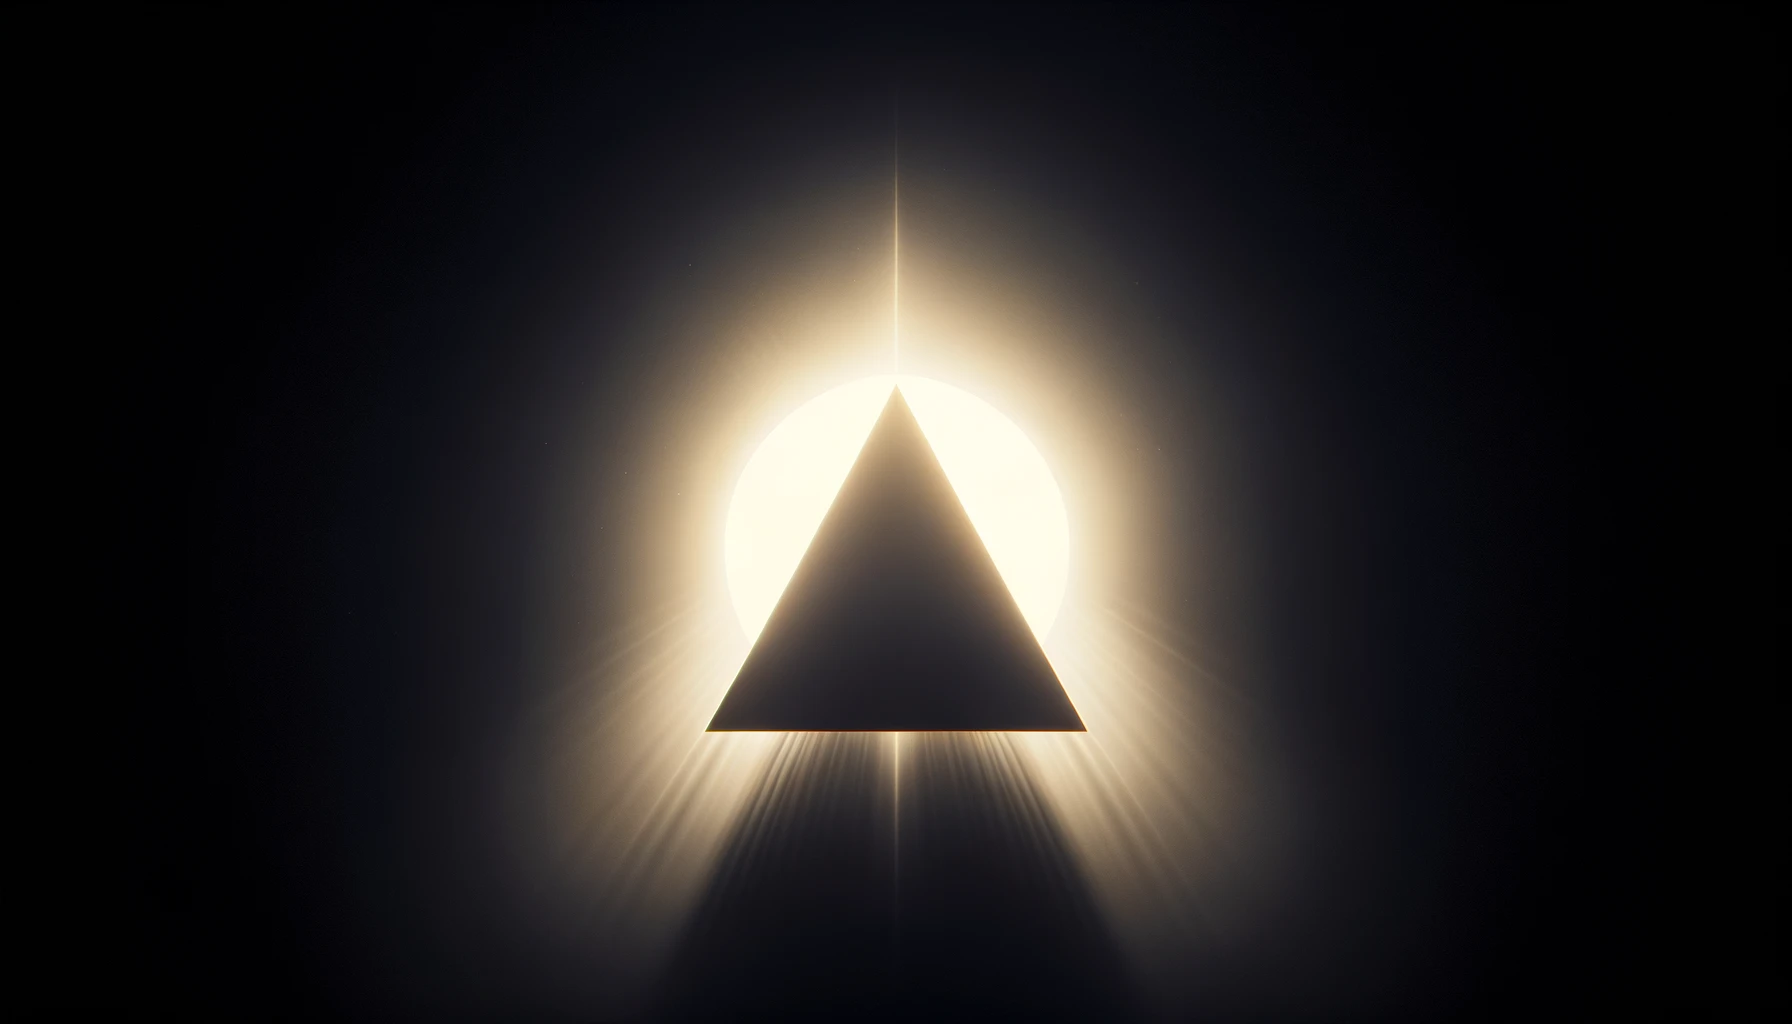 The image displays a plain, white isosceles triangle centered on a black background, with a soft, yellowish glow subtly emanating from behind it. This glow provides a gentle contrast, enhancing the clear and sharp geometry of the triangle.